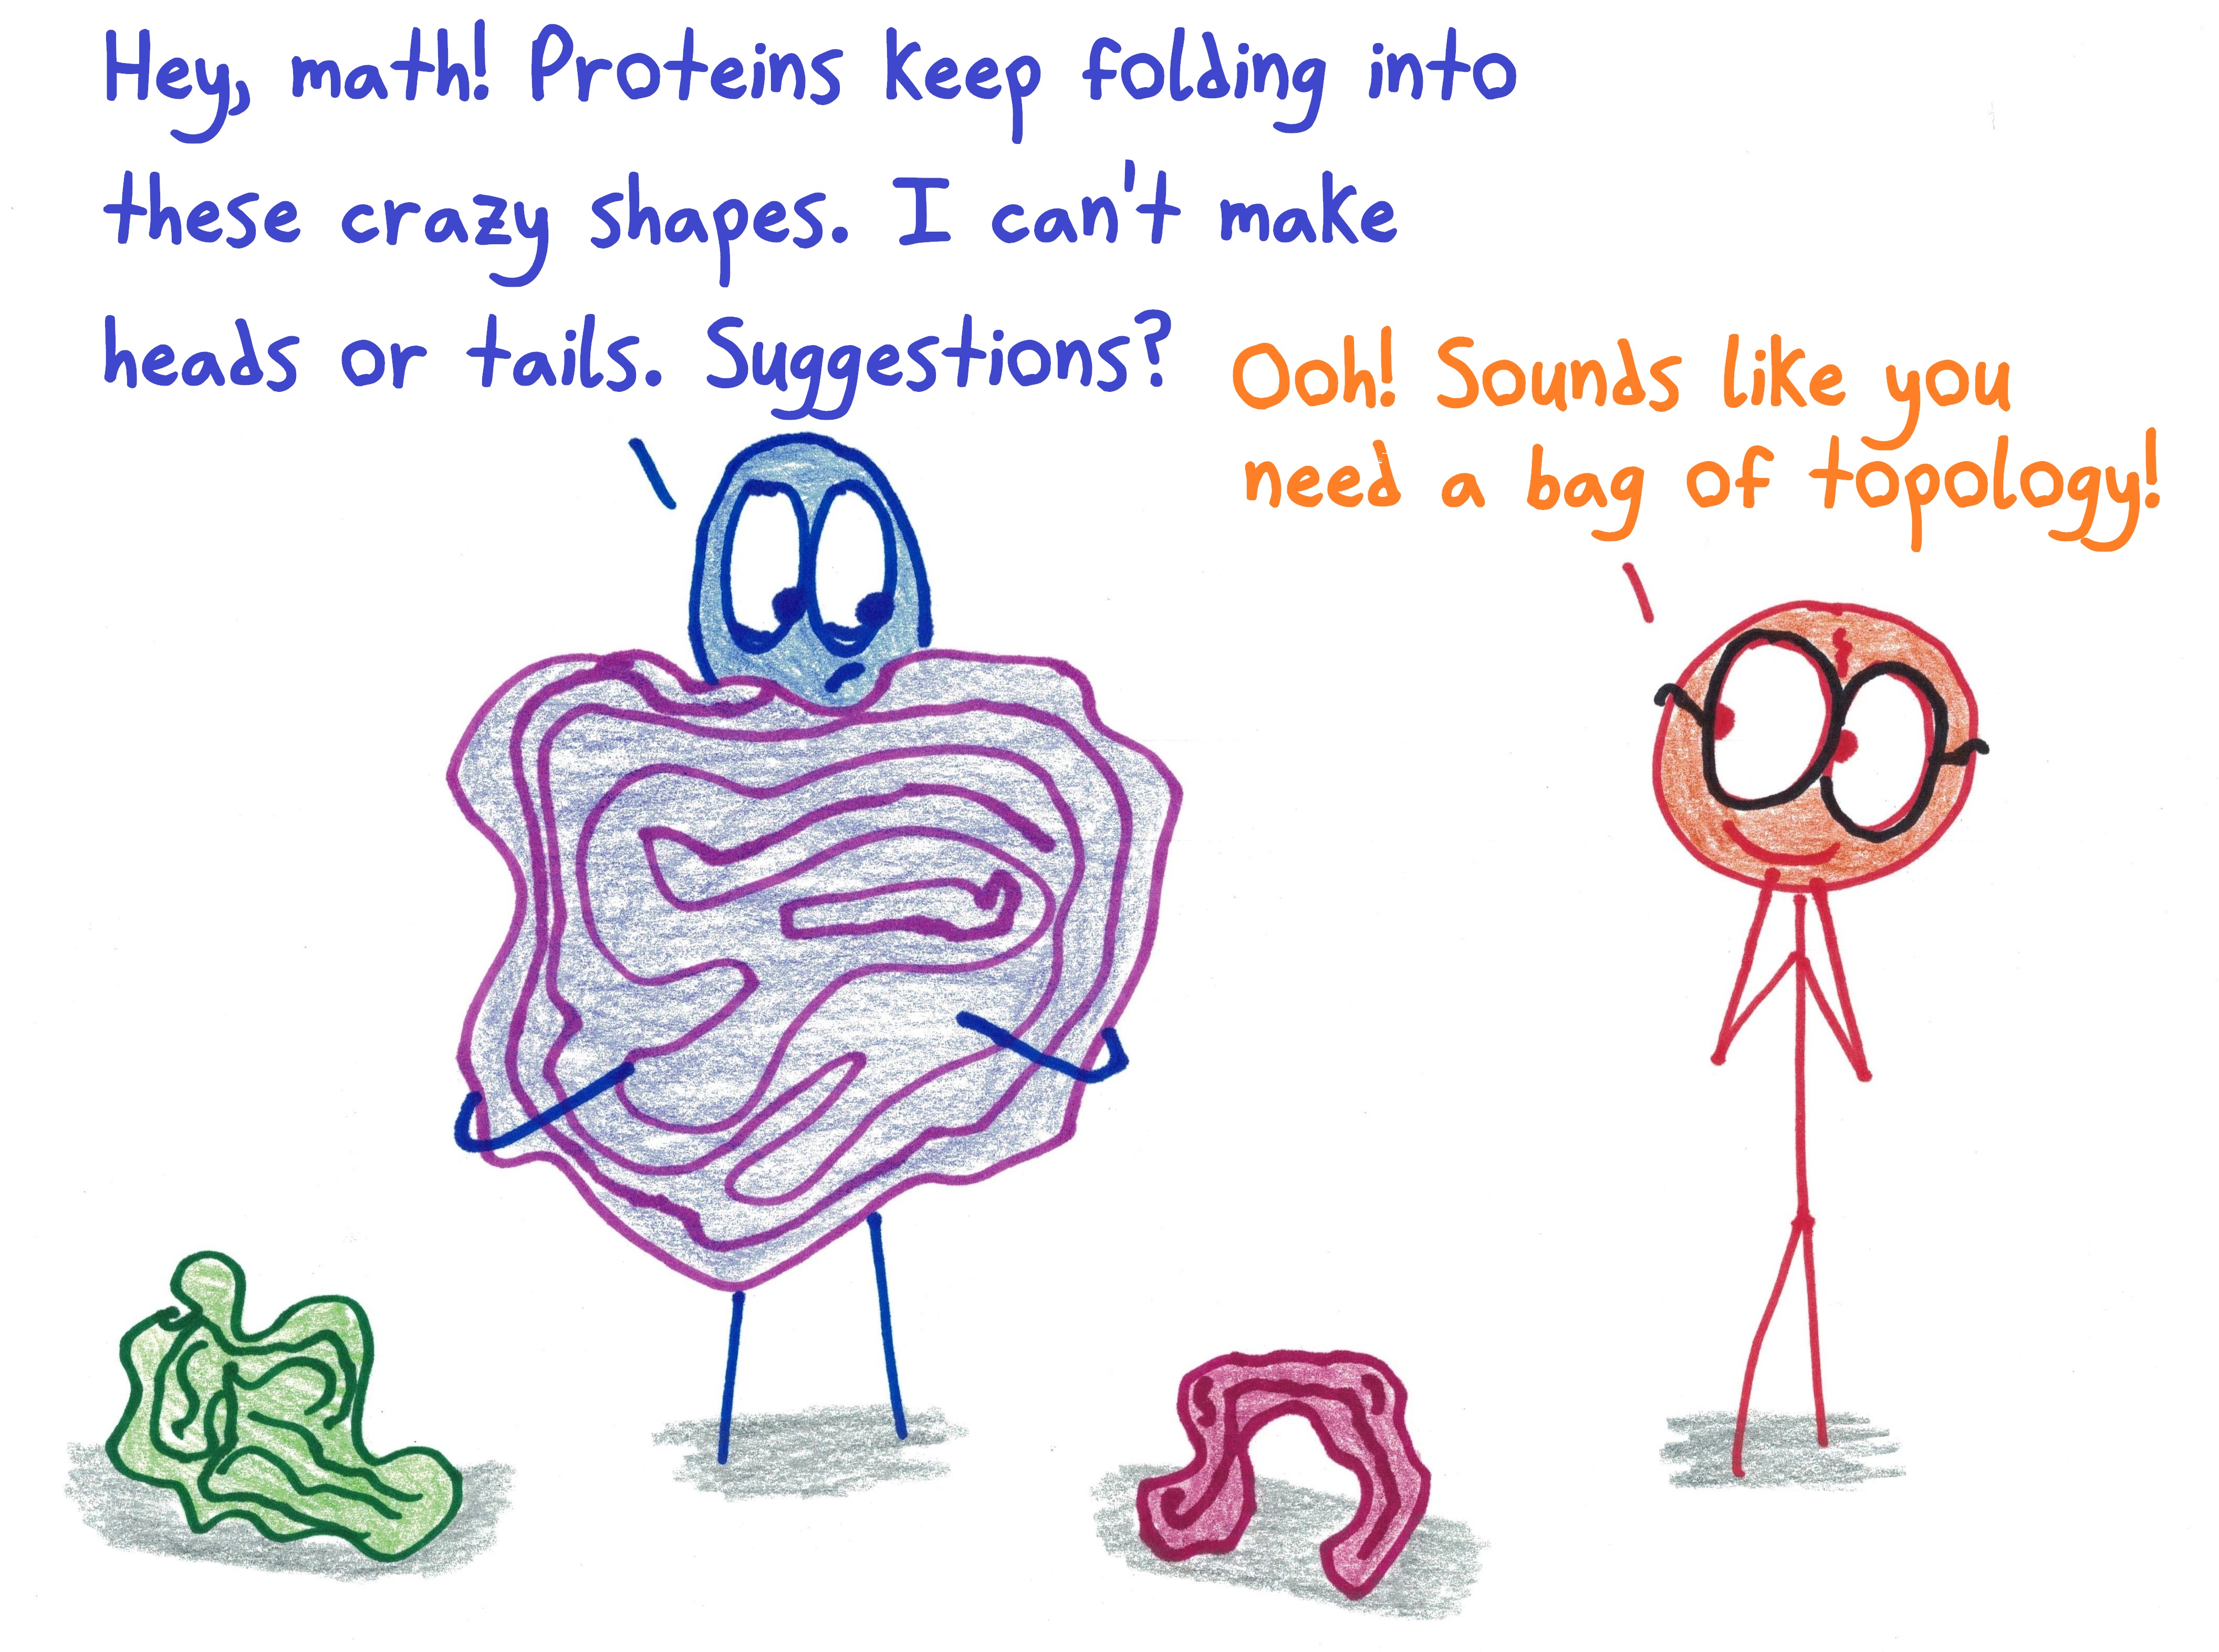 "'Hey, math. Proteins keep folding into these crazy shapes. I can't make heads or tails of it. Suggestions?' 'Sounds like you need a bag of topology'"